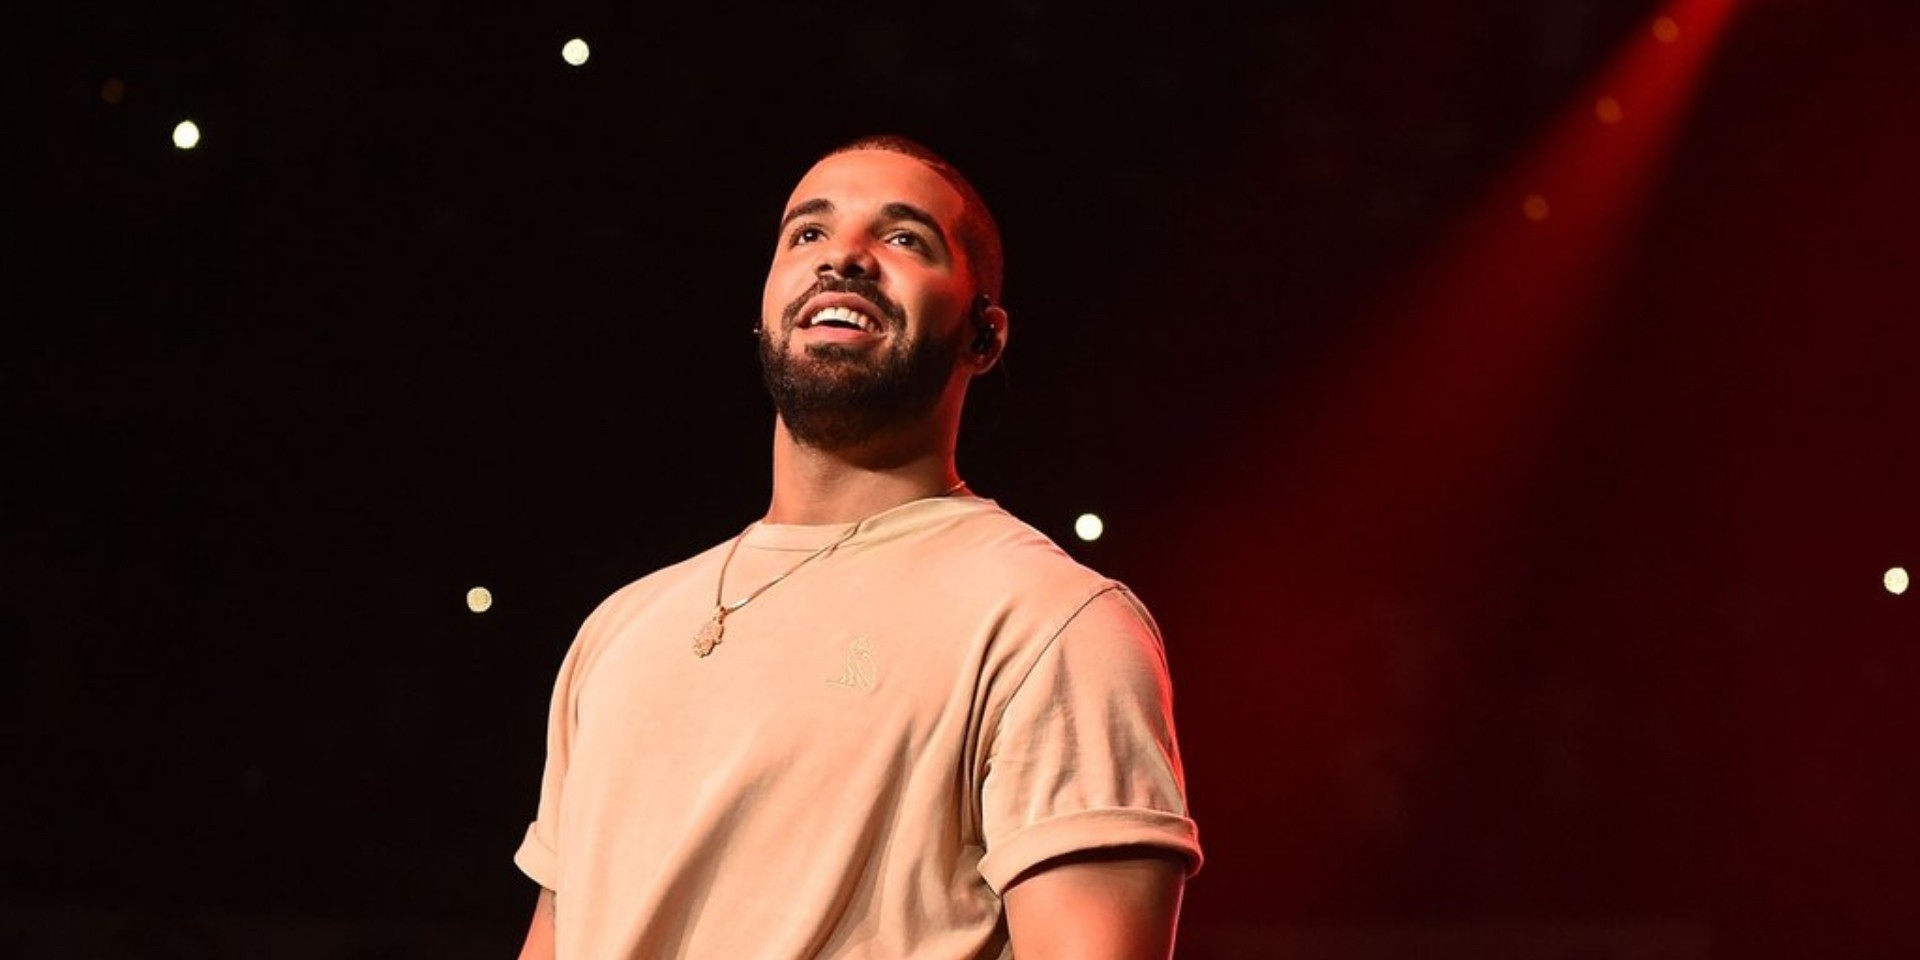 Drake breaks Billboard record for most top 10 songs in a year